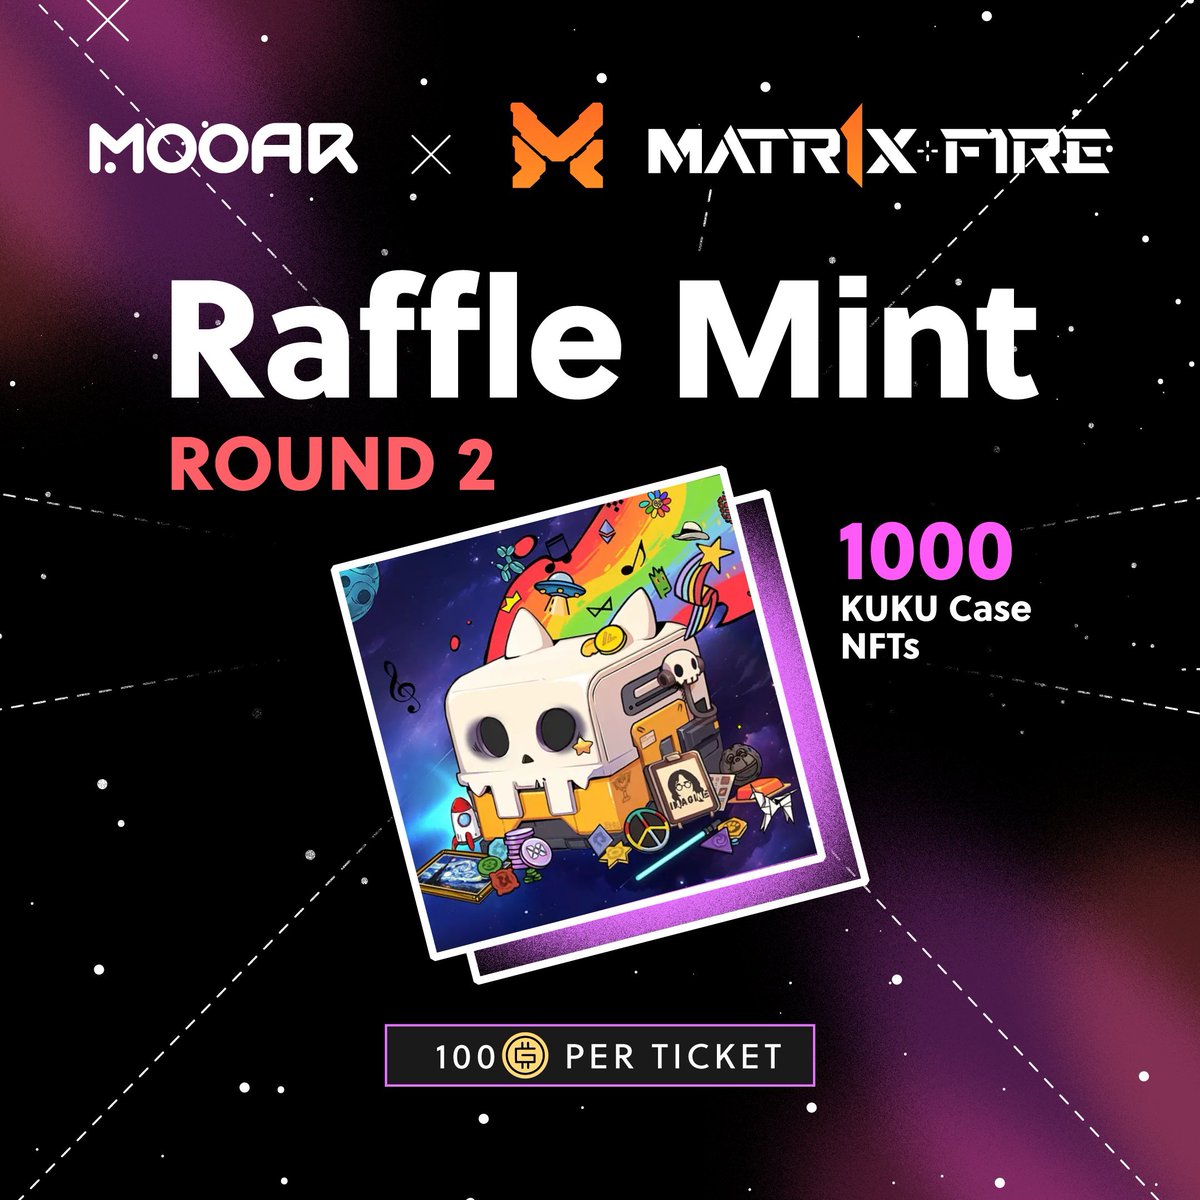 Join the @MOOAROfficial #Matr1xCase Raffle Mint Pt. 2

Open to ALL - May 16-18, 3 rounds, 24 hours each.

Grab unlimited tickets at 100 $GMT each.

No win? Full refund.

Don't miss out: mooar.com/rafflemint/mat…